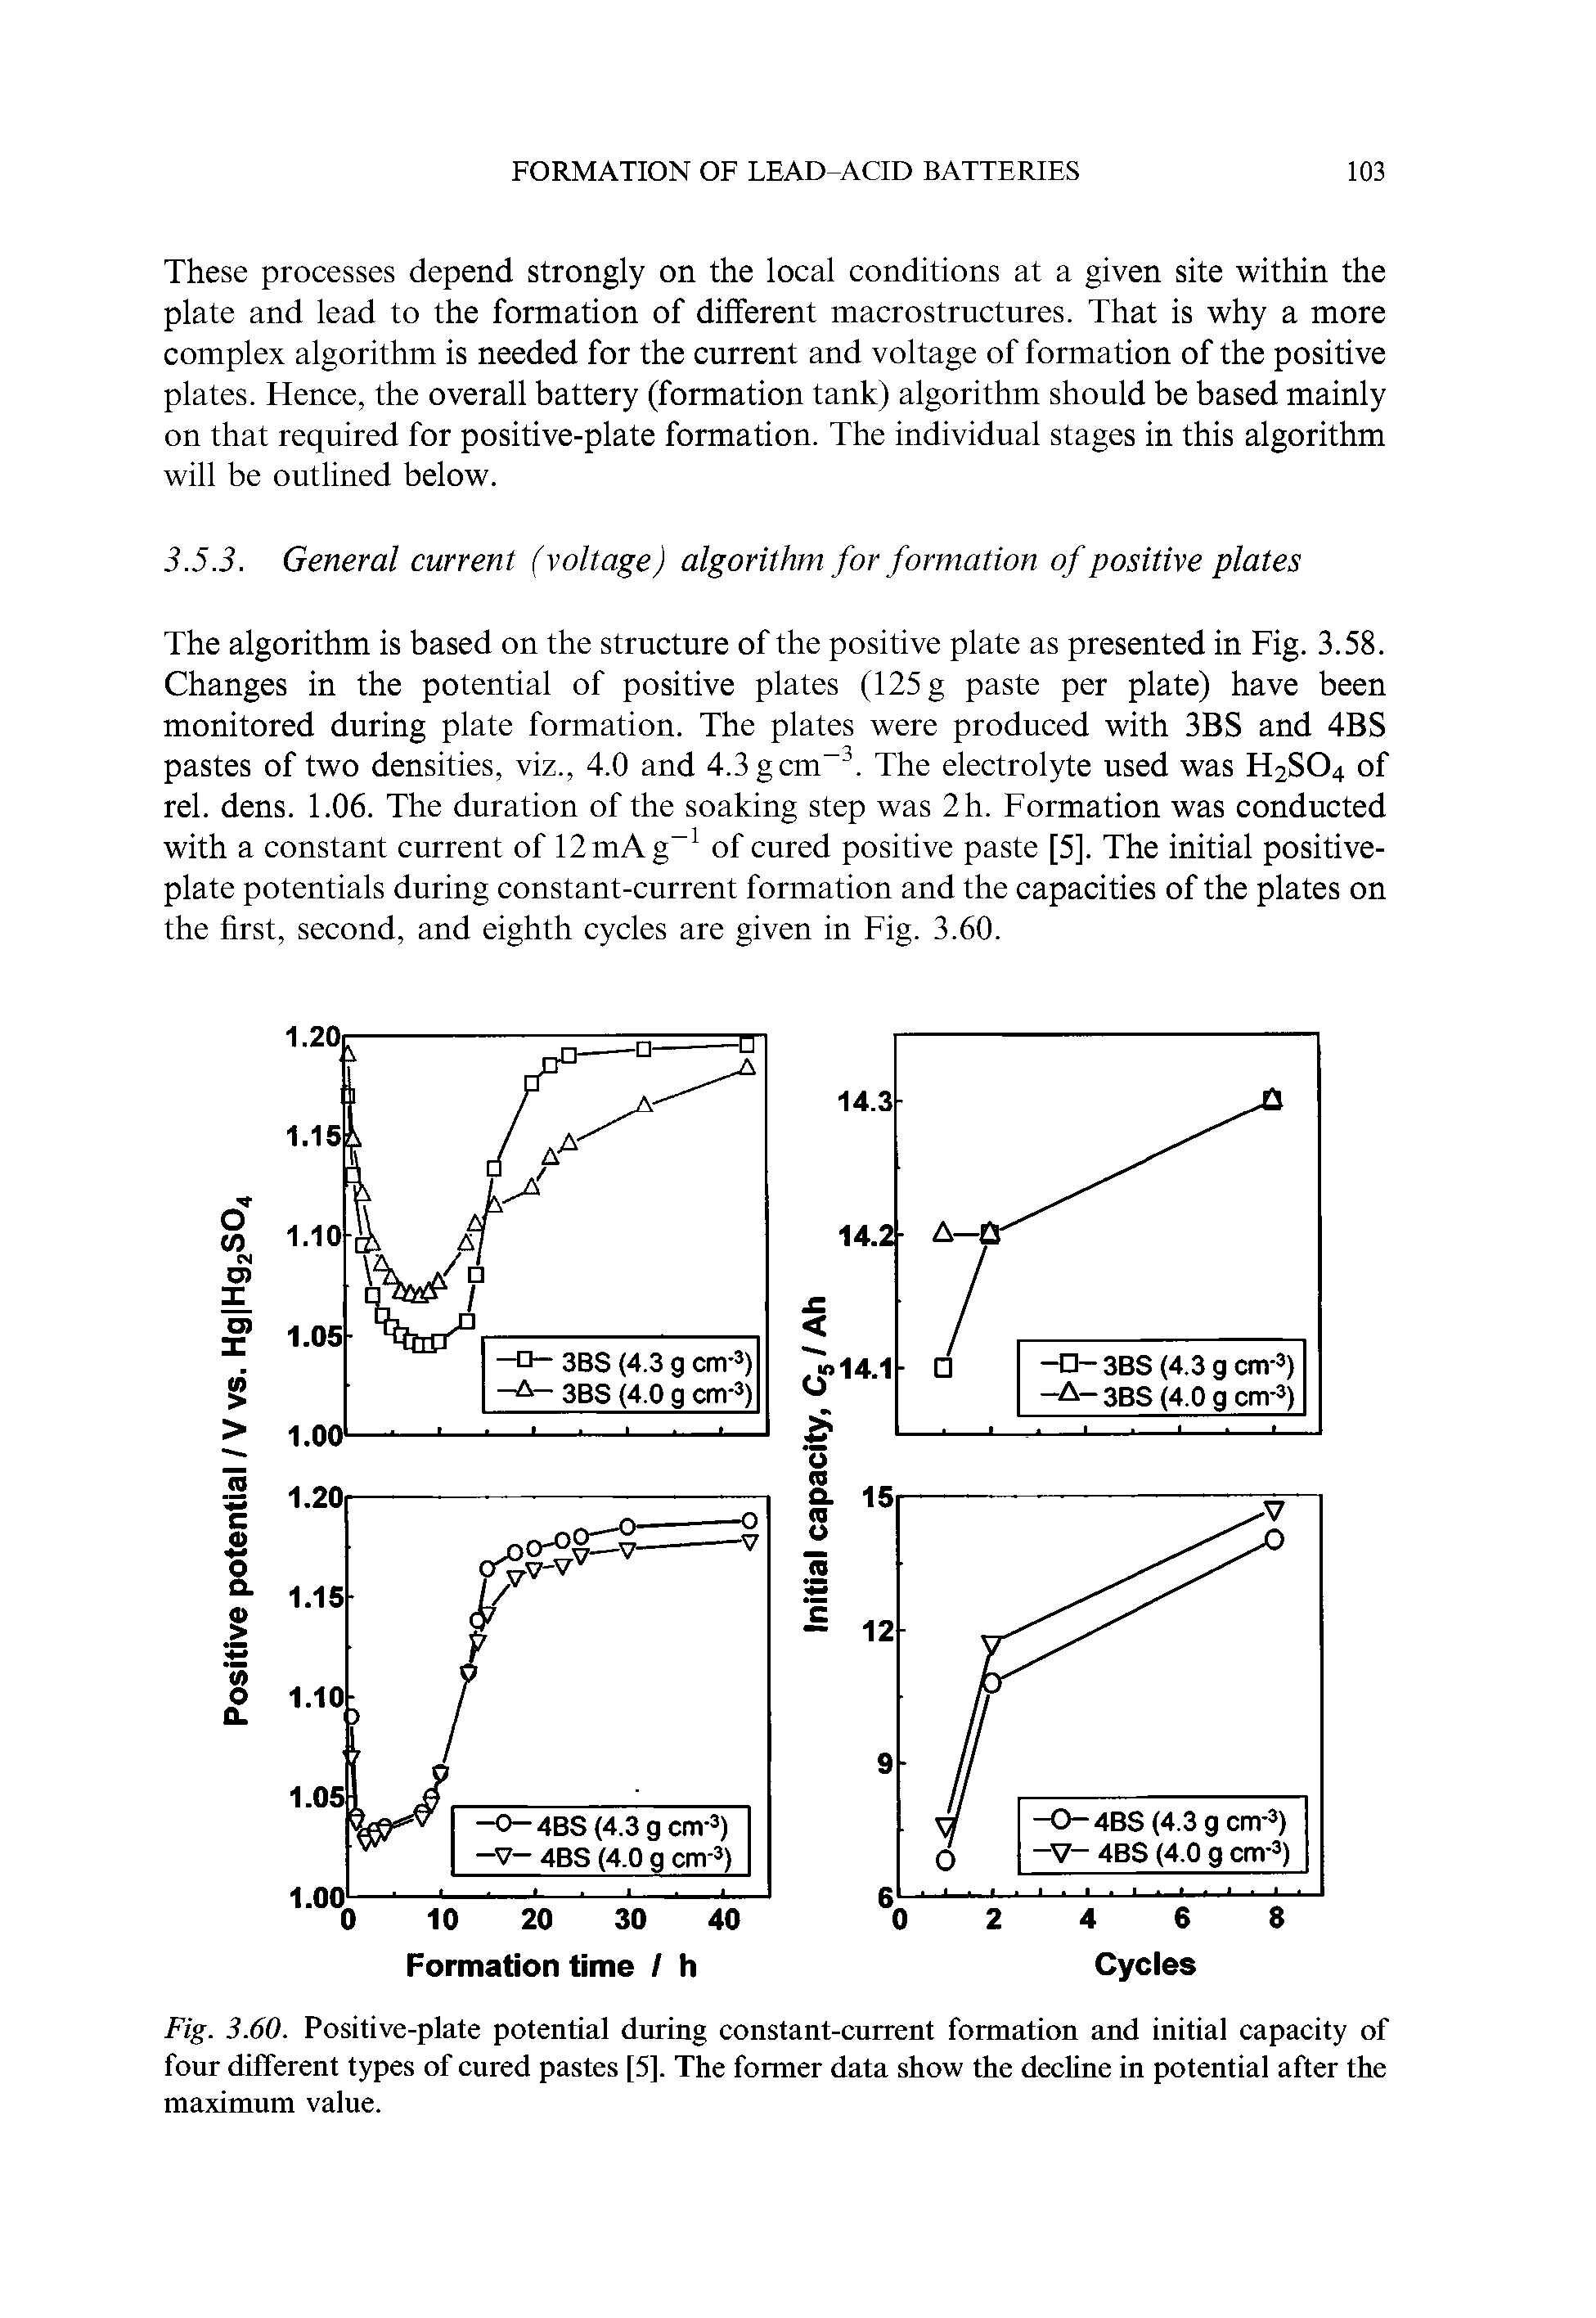 Fig. 3.60. Positive-plate potential during constant-current formation and initial capacity of four different types of cured pastes [5]. The former data show the decline in potential after the maximum value.